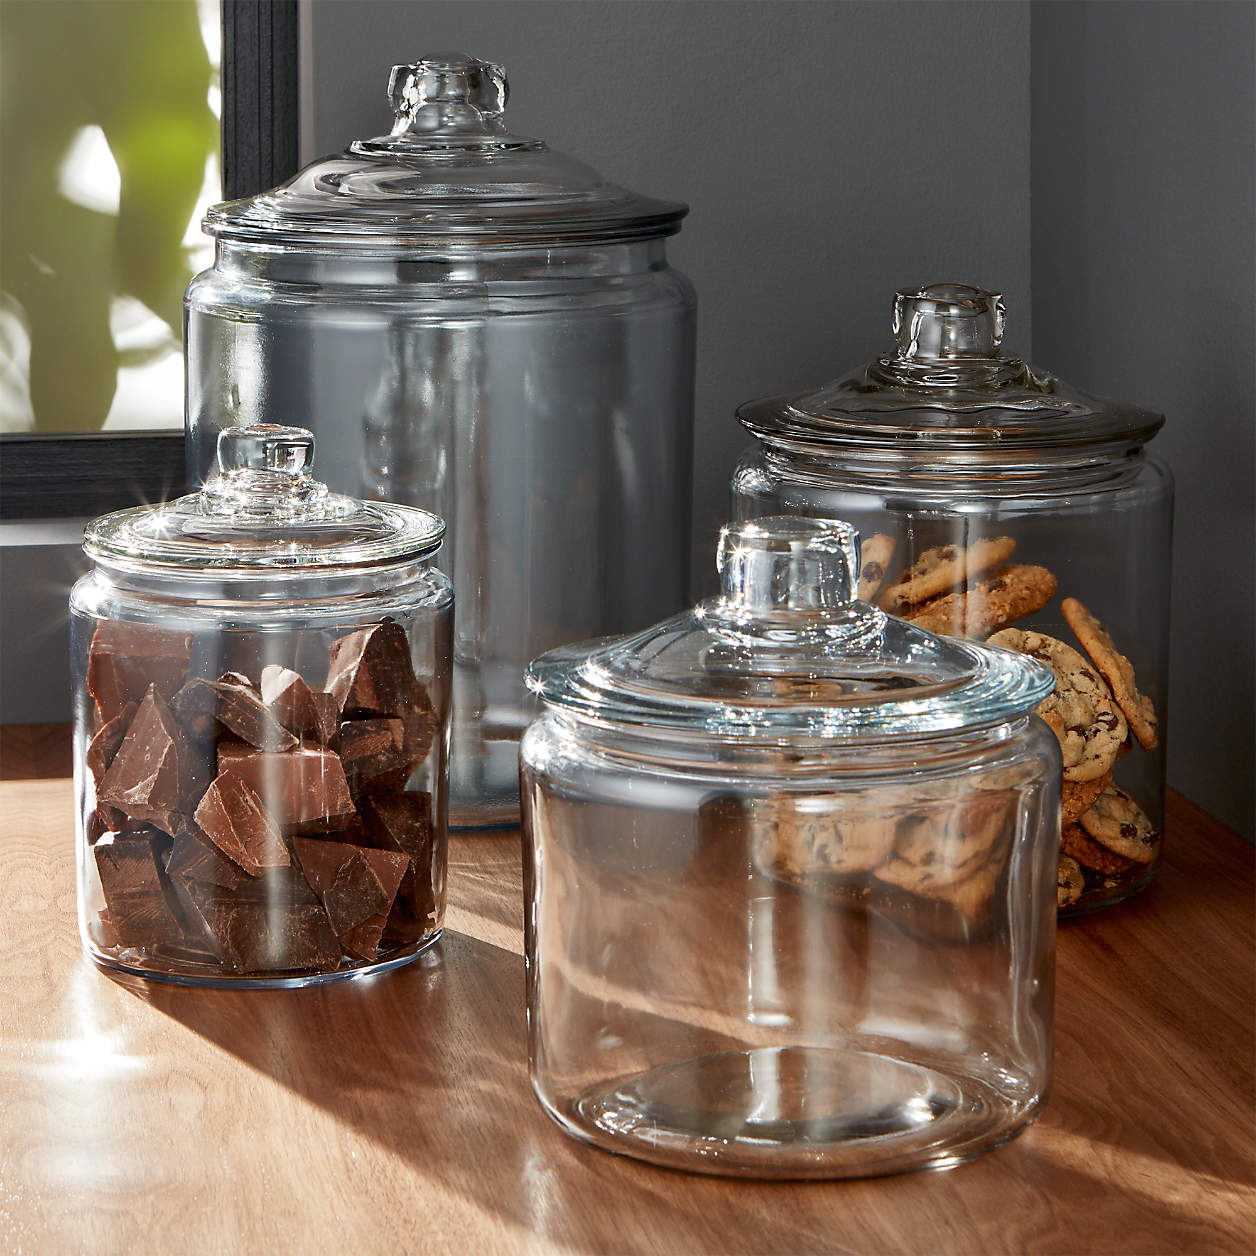 Anchor Hocking Heritage Hill Glass Jar with Lid, 2 Gallon